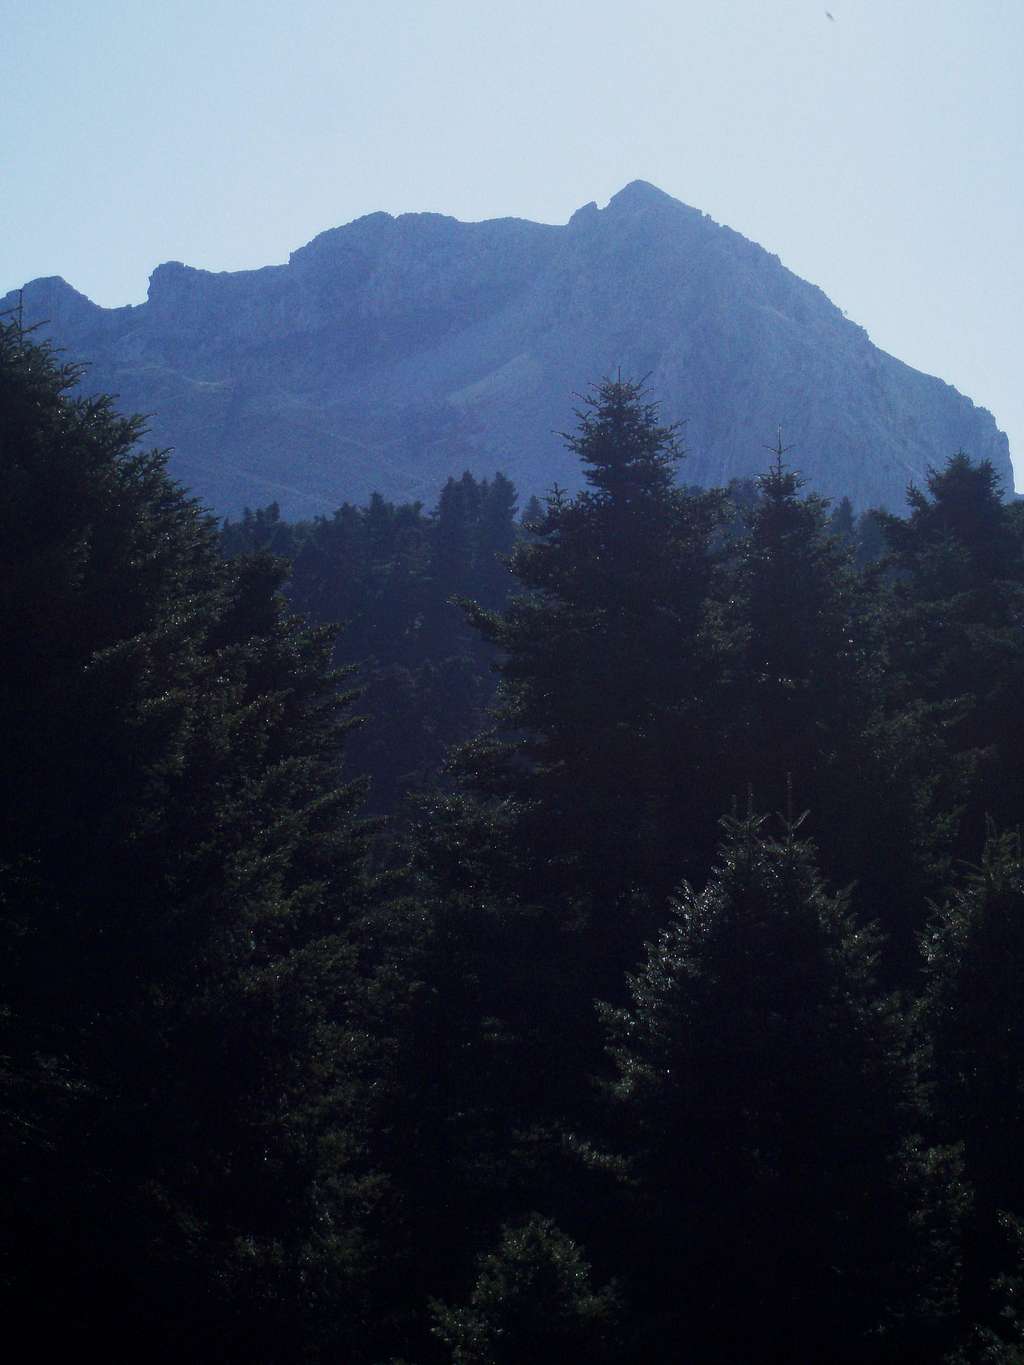 The dense fir forest and the 1418m. peak in the background